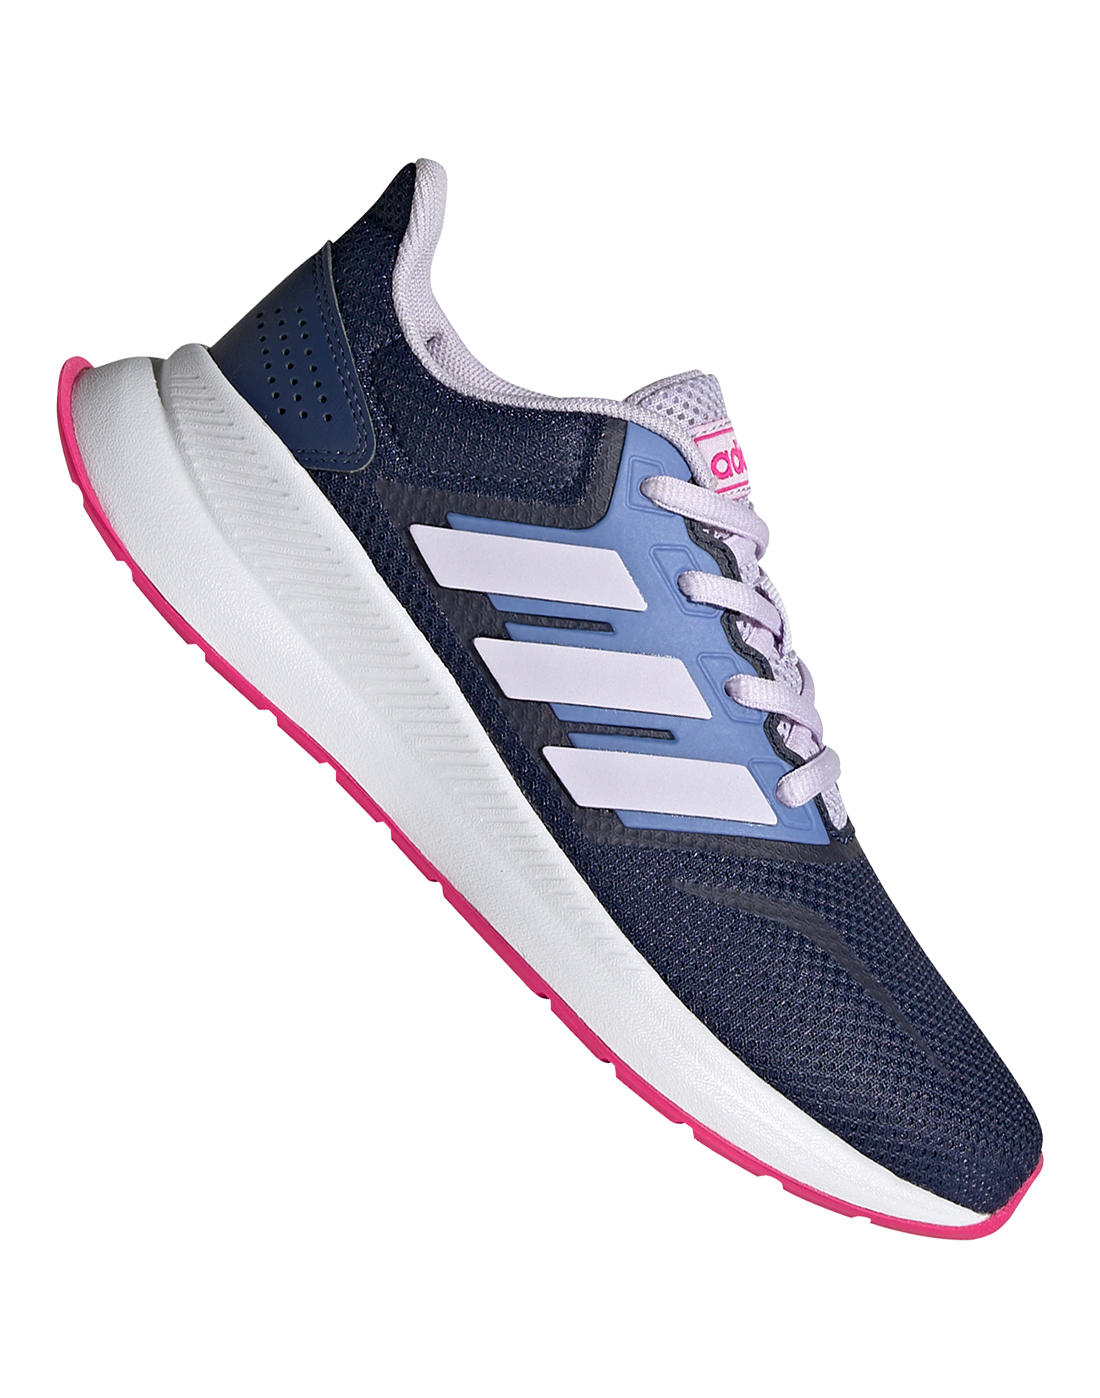 adidas runners for girls